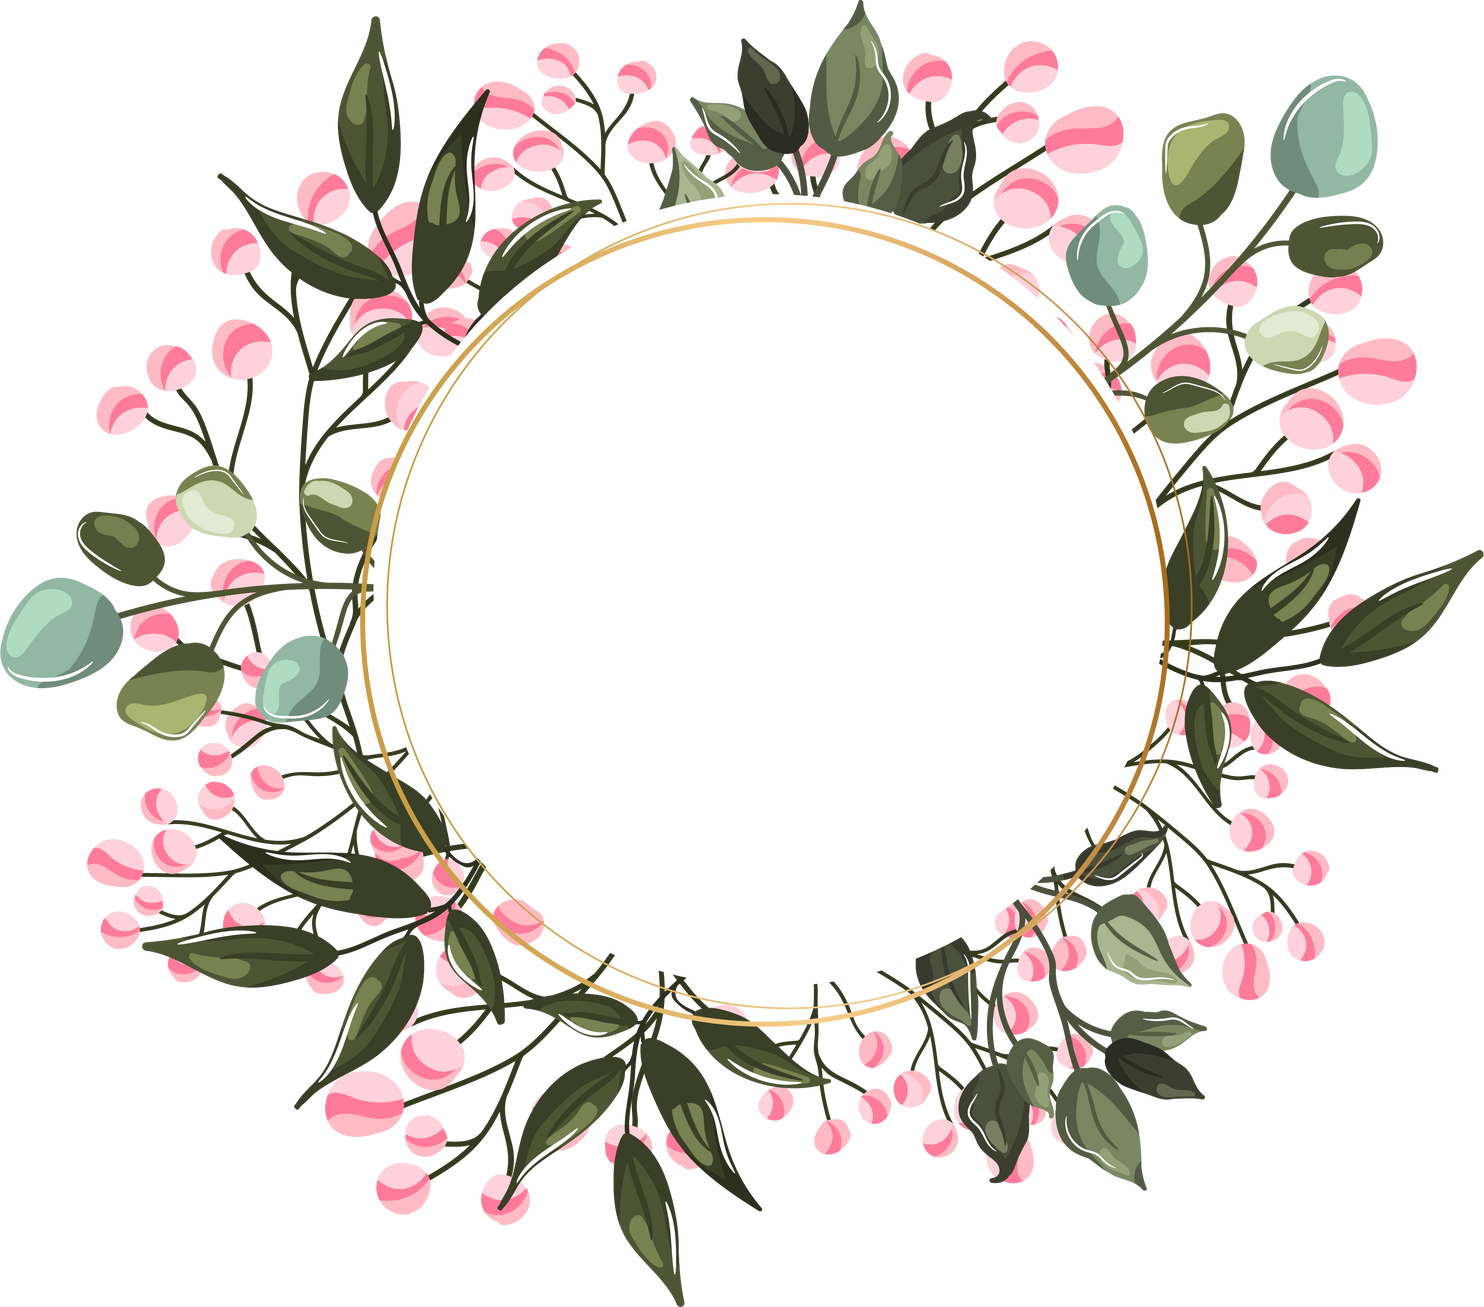 Circular Frame with Flowers Illustration